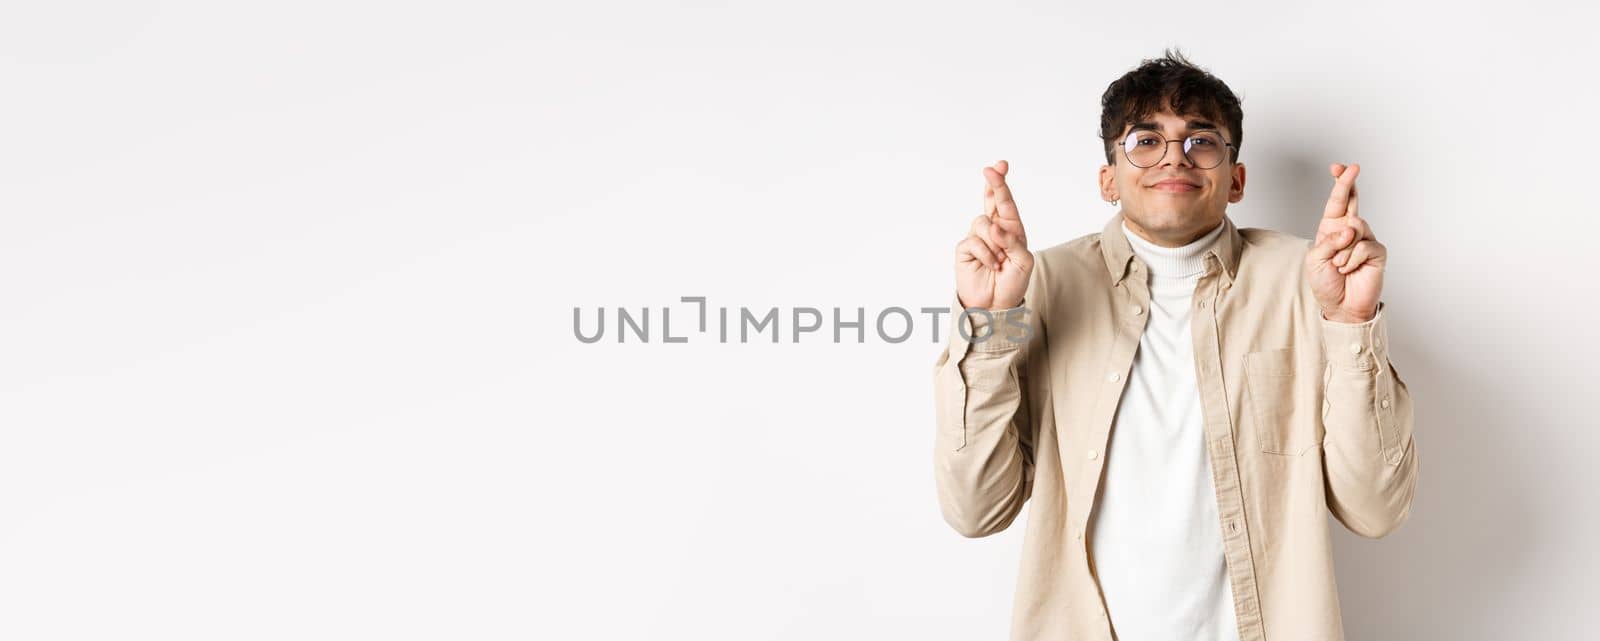 Hope. Happy young man making wish and smiling, looking hopeful at camera as waiting for dream come true, cross fingers for good luck, standing on white background.